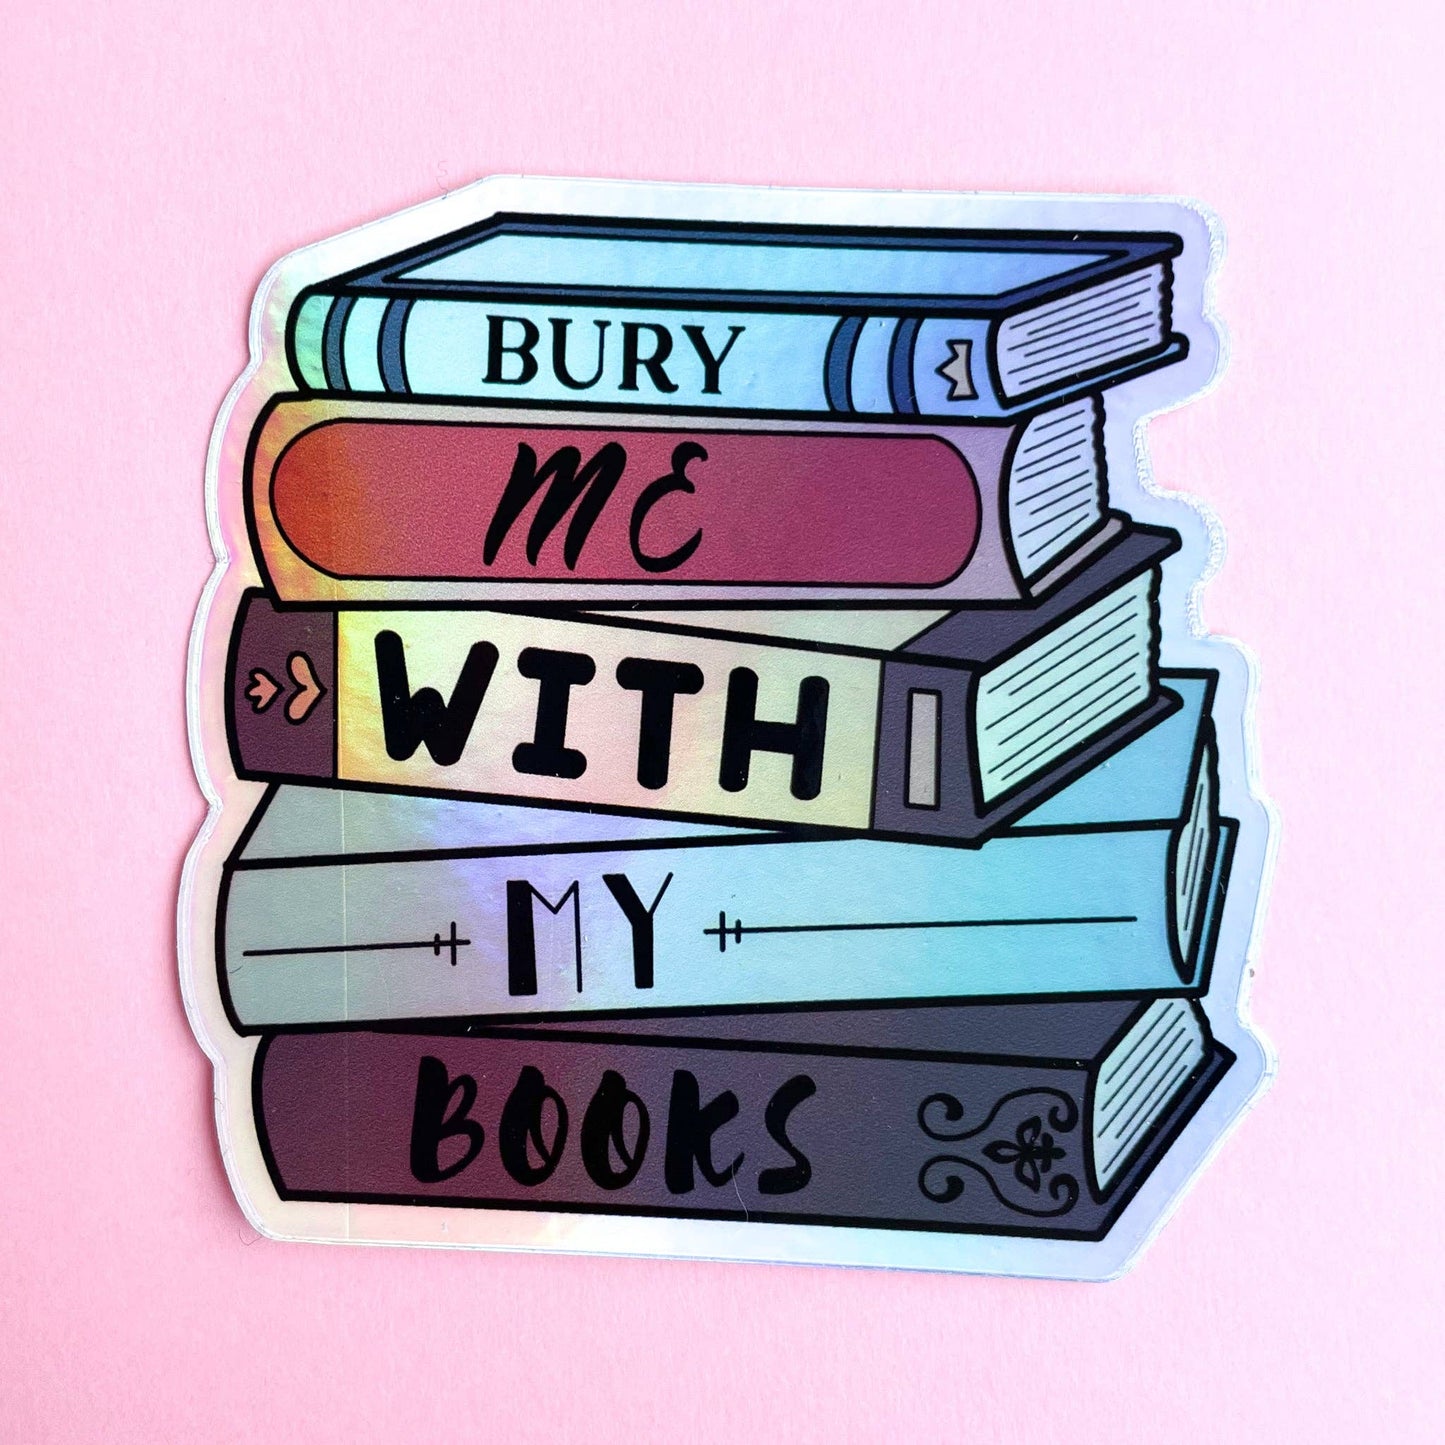 Bury Me With My Books Holographic Sticker